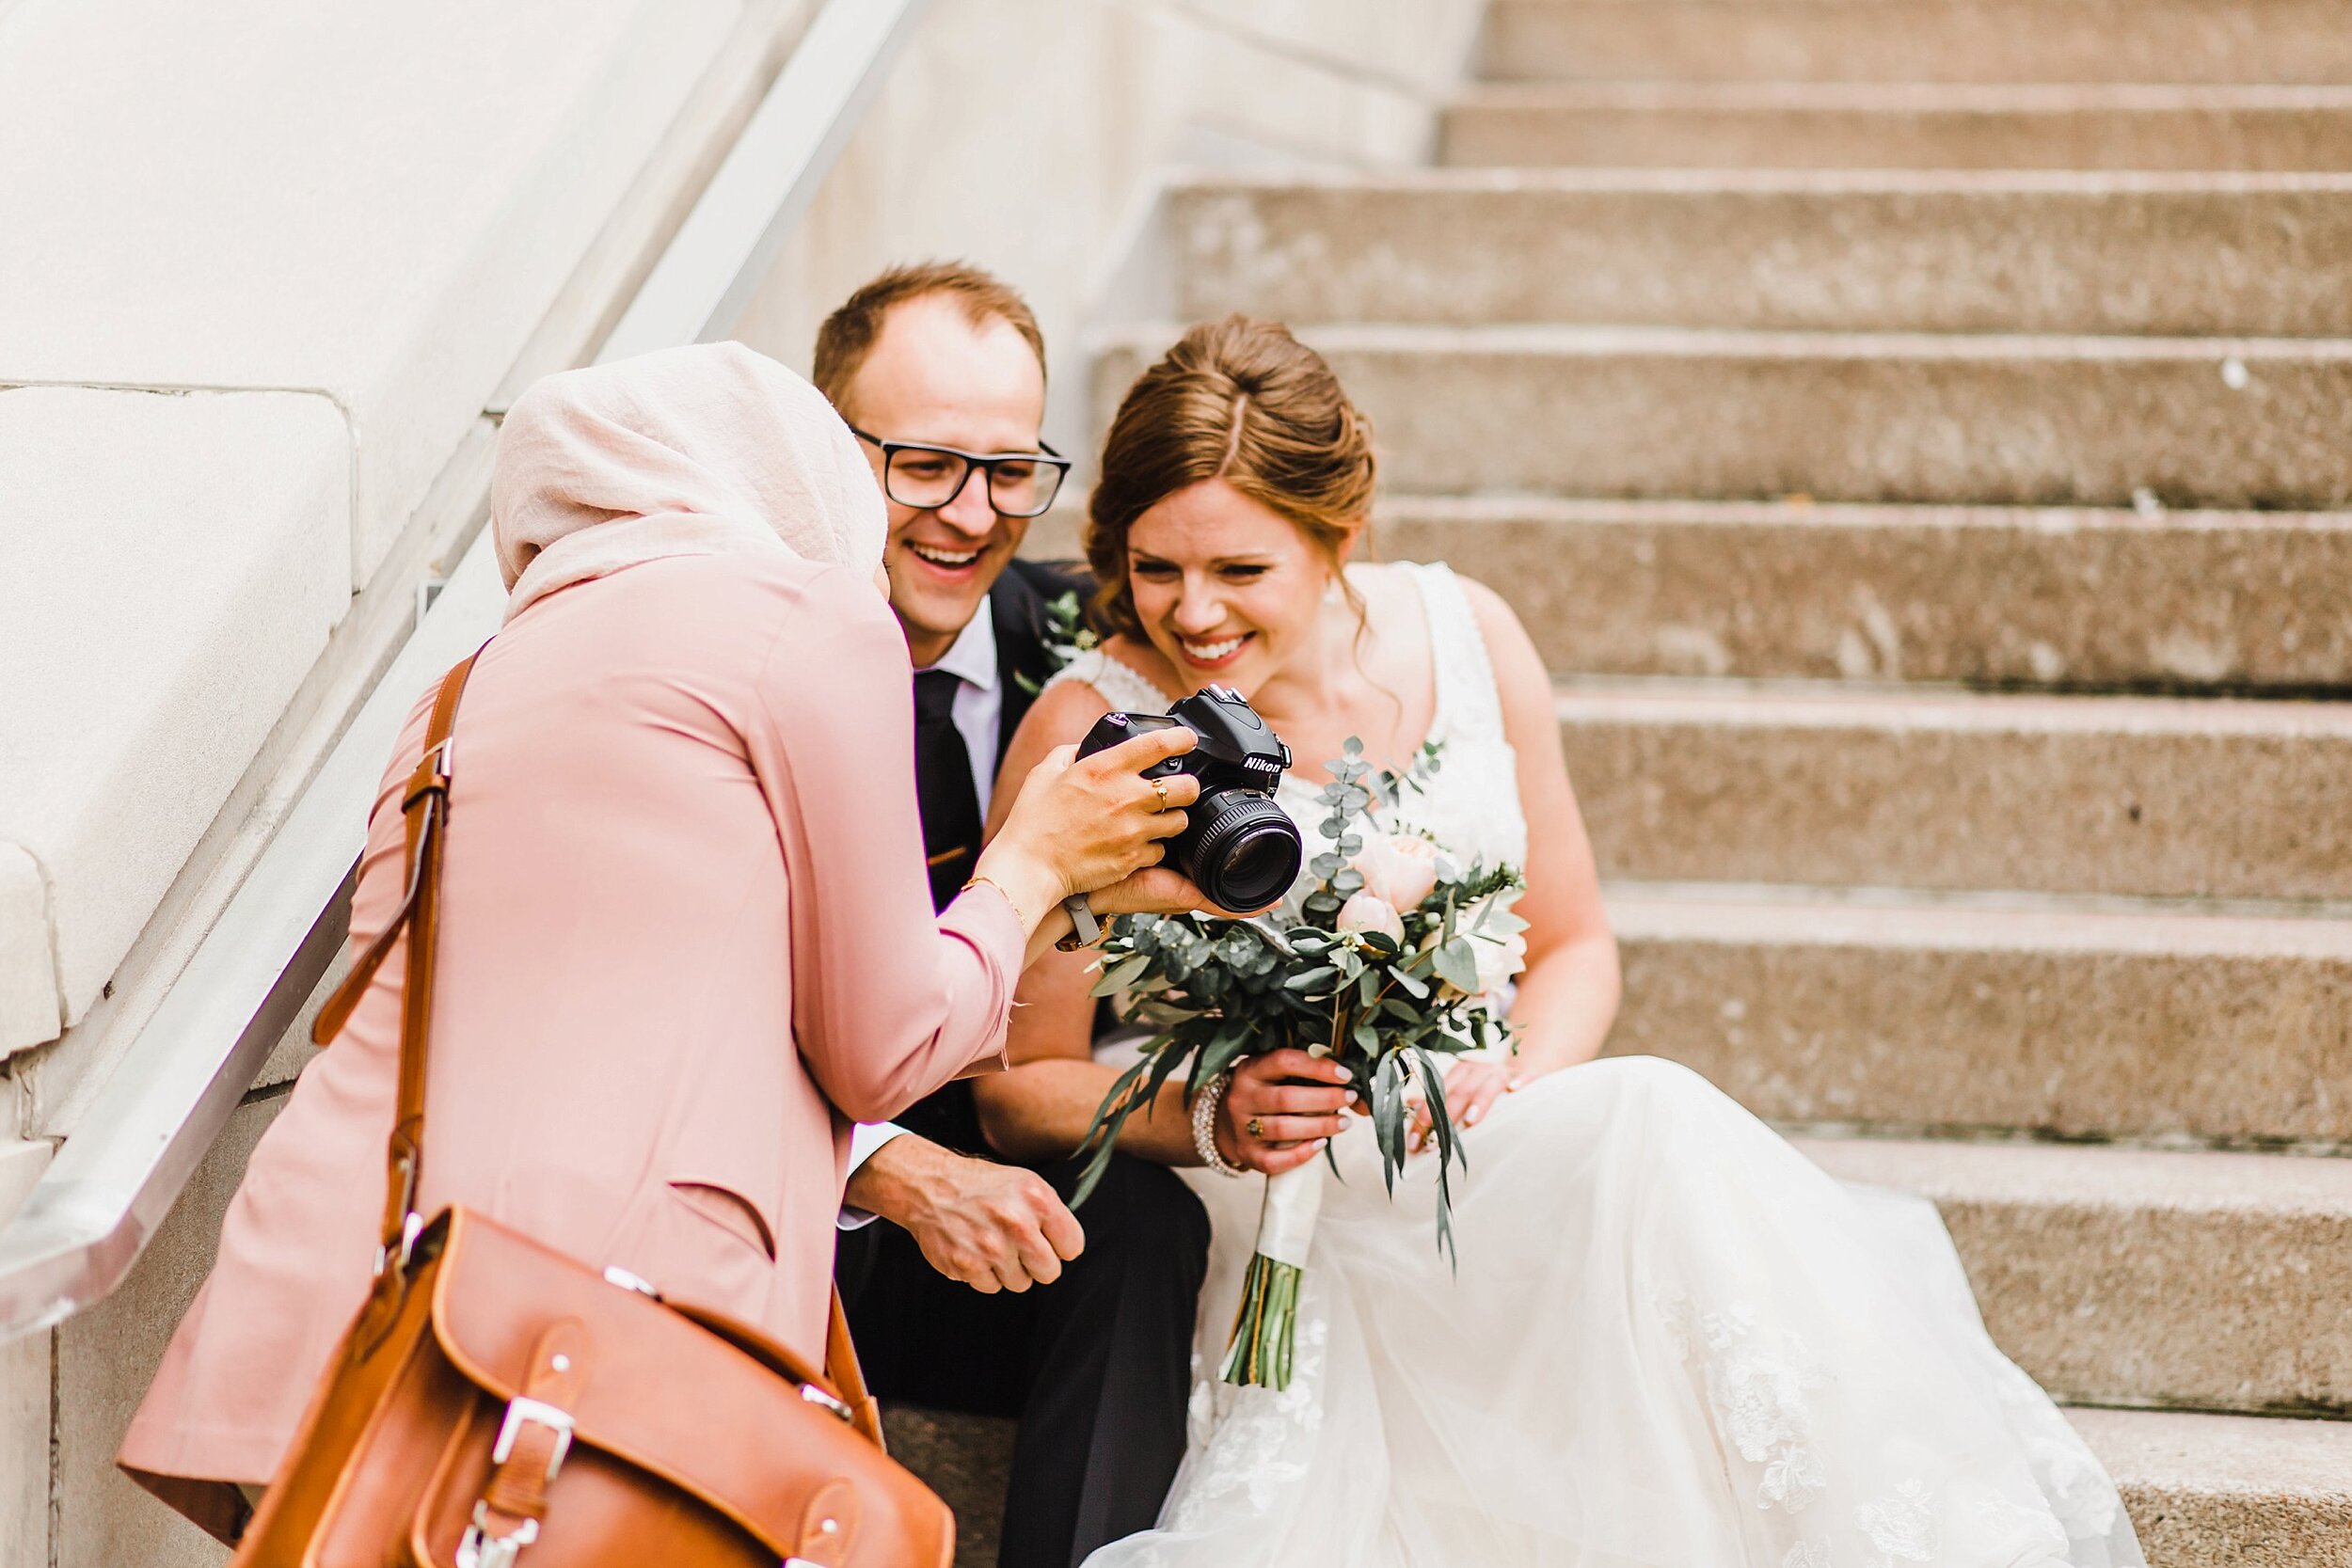  I love seeing my couples’ reactions when I show them a photo or two of themselves on their wedding day! 